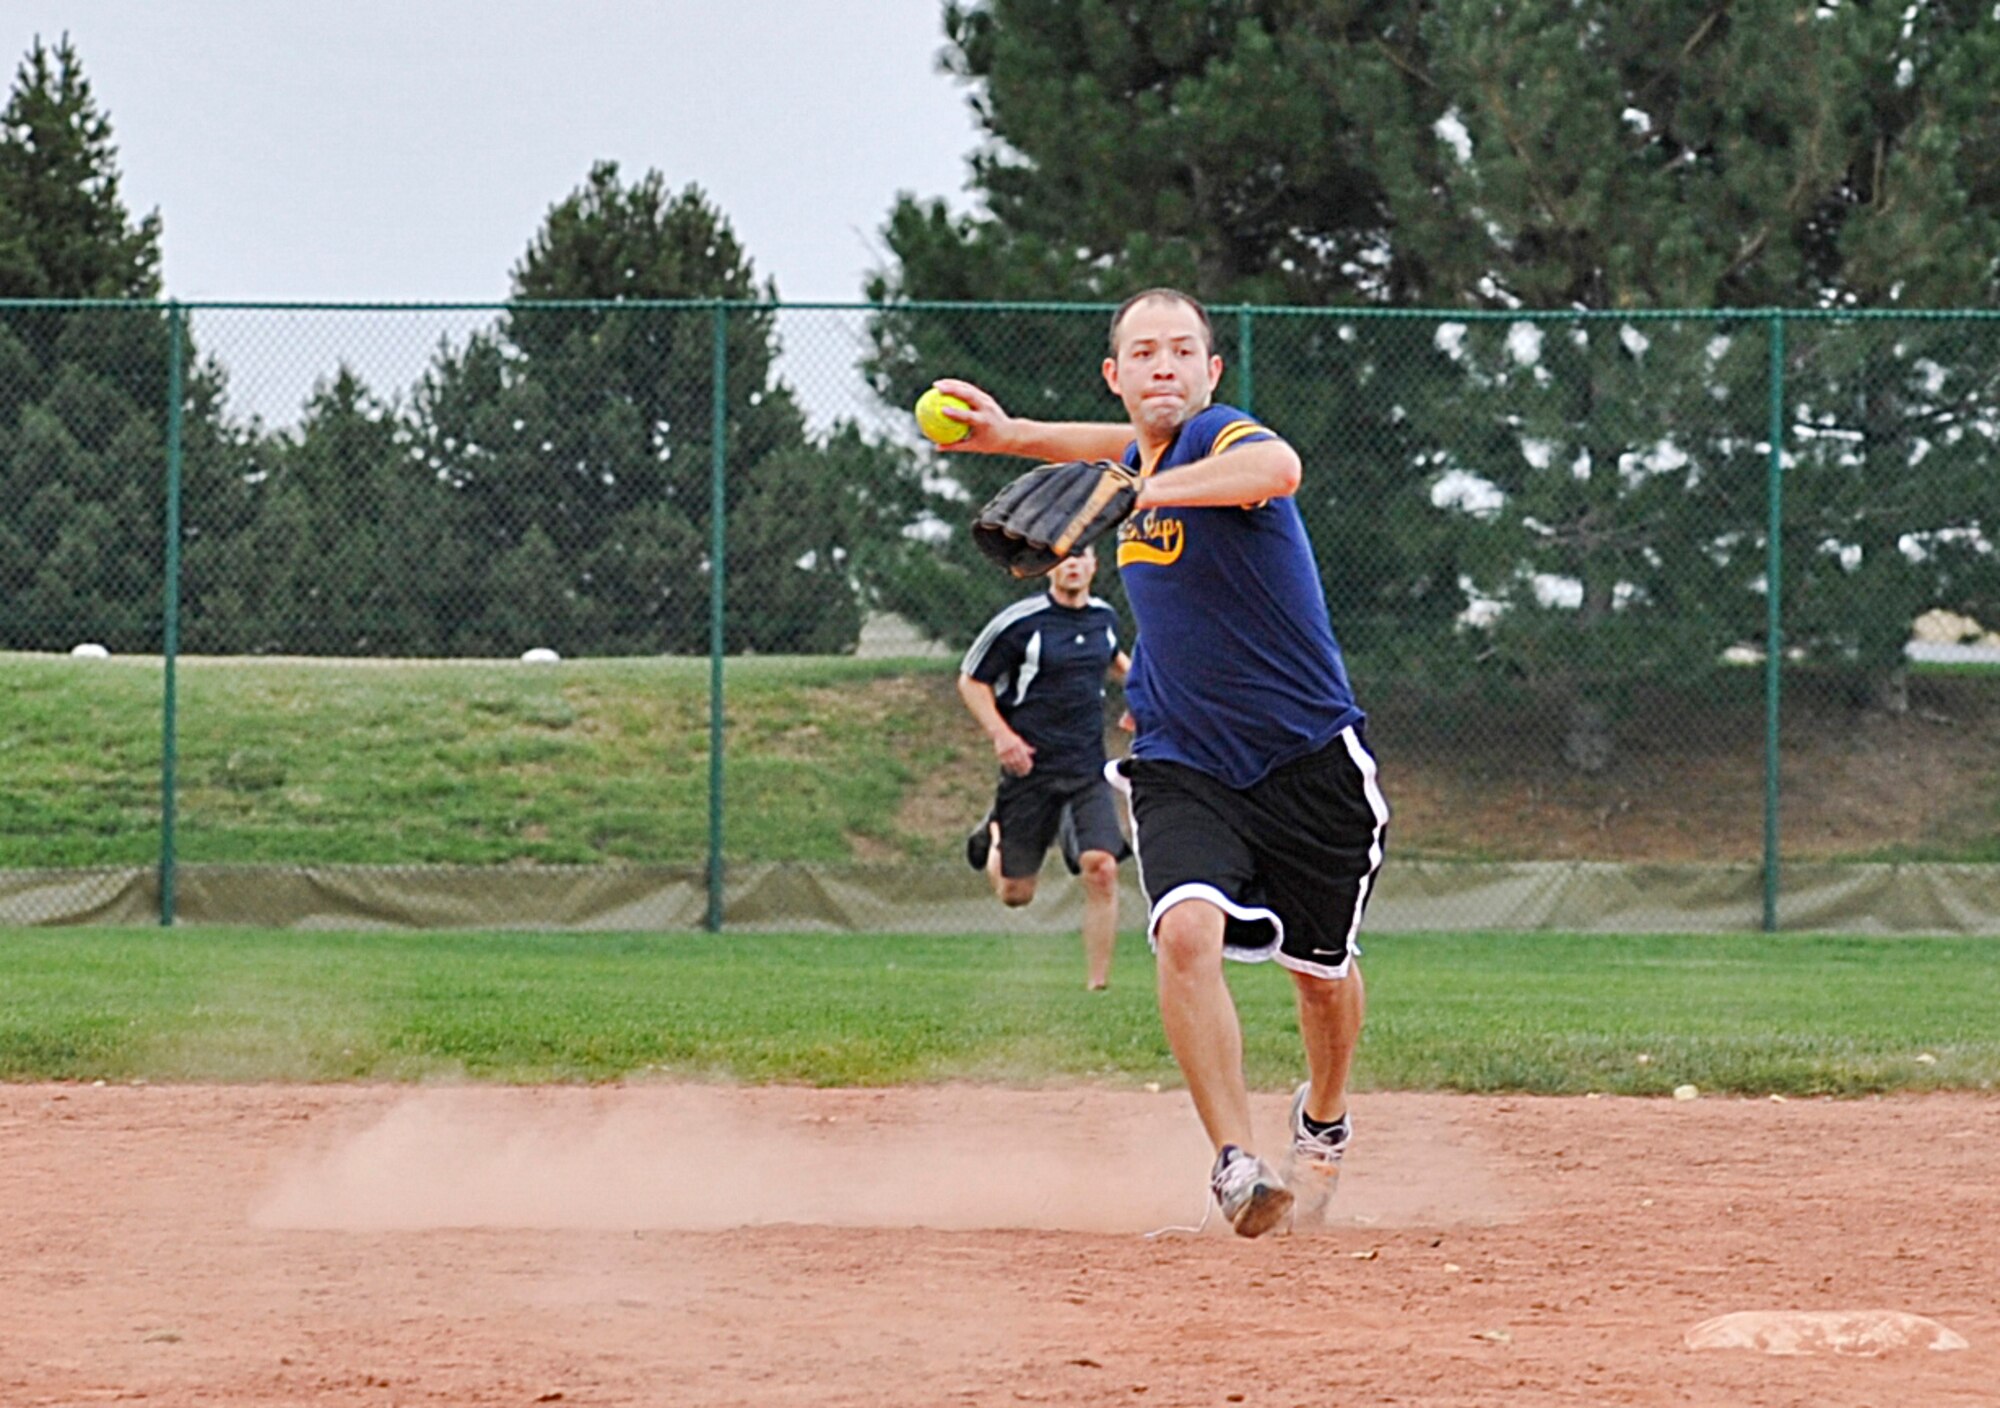 BUCKLEY AIR FORCE BASE, Colo. – Jason Loeza makes a throw to first base from shortstop during a game of intramural softball Aug. 9, 2012. Loeza is a petty officer first class playing shortstop for the Navy Operational Support Center, Denver. His team lost to the Marine Air Control Squadron with a score of 24-1. (U.S. Air Force photo by Senior Airman Christopher Gross)